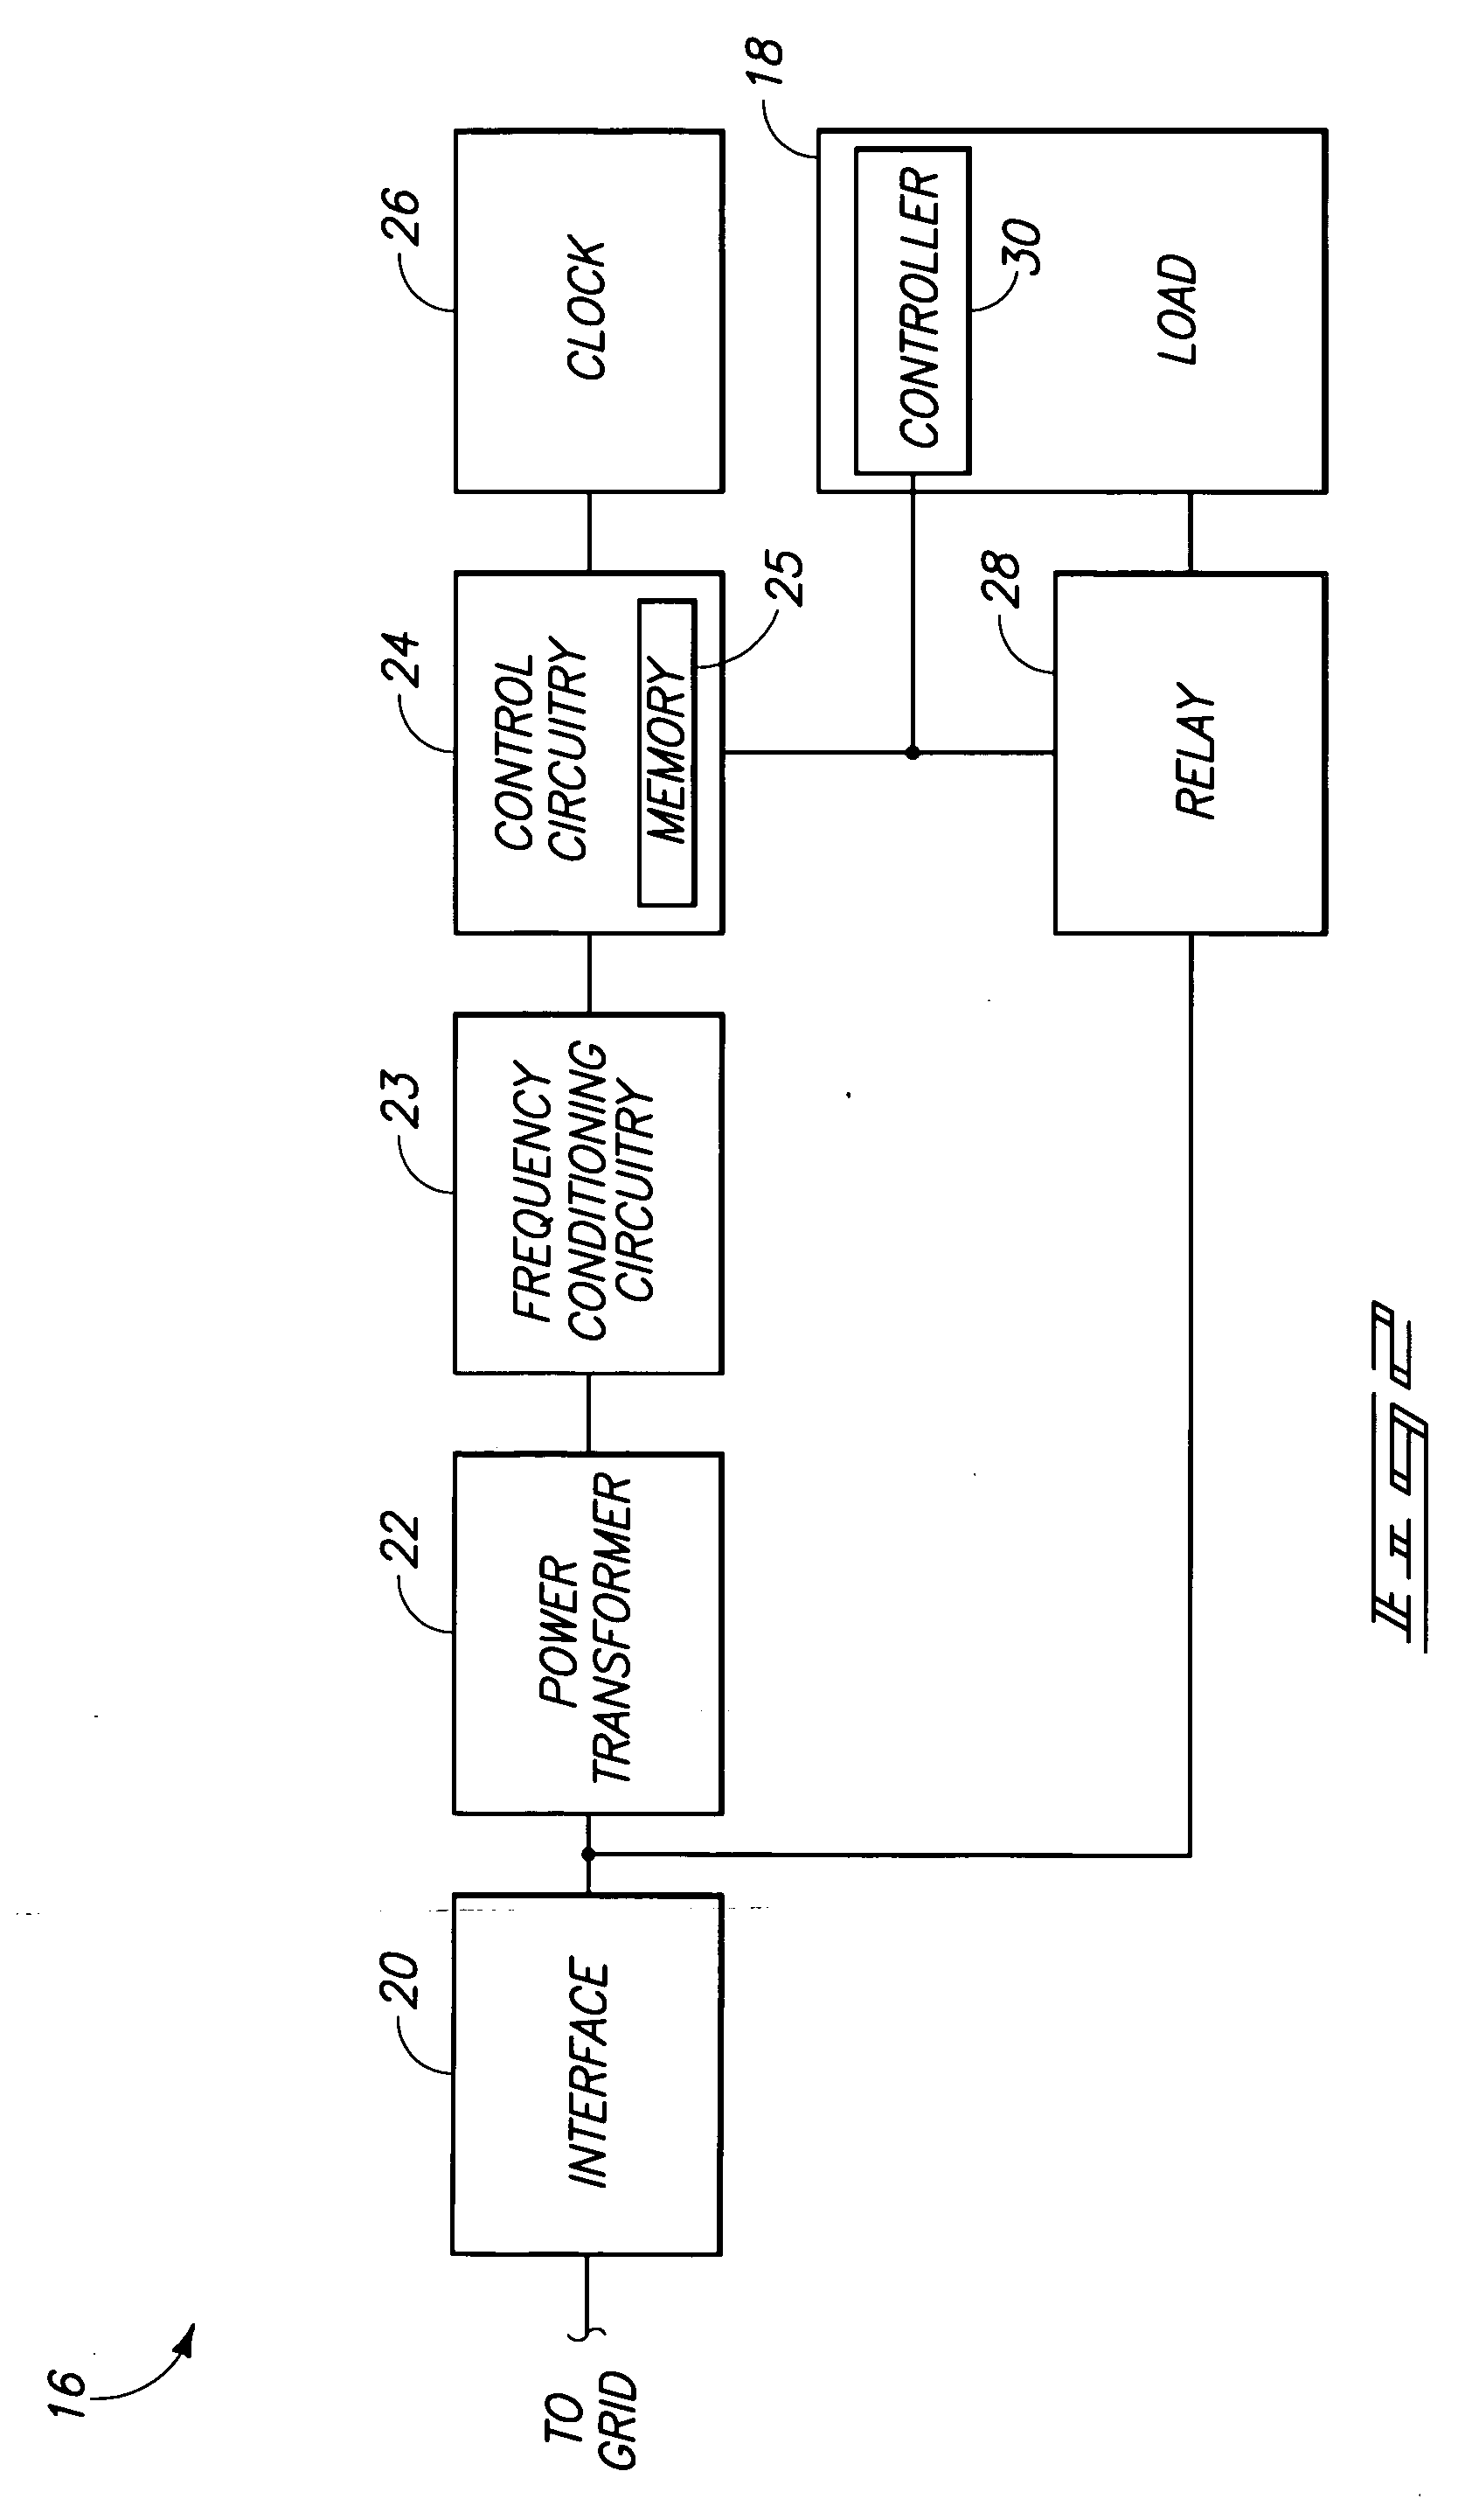 Electrical power distribution control methods, electrical energy demand monitoring methods, and power management devices